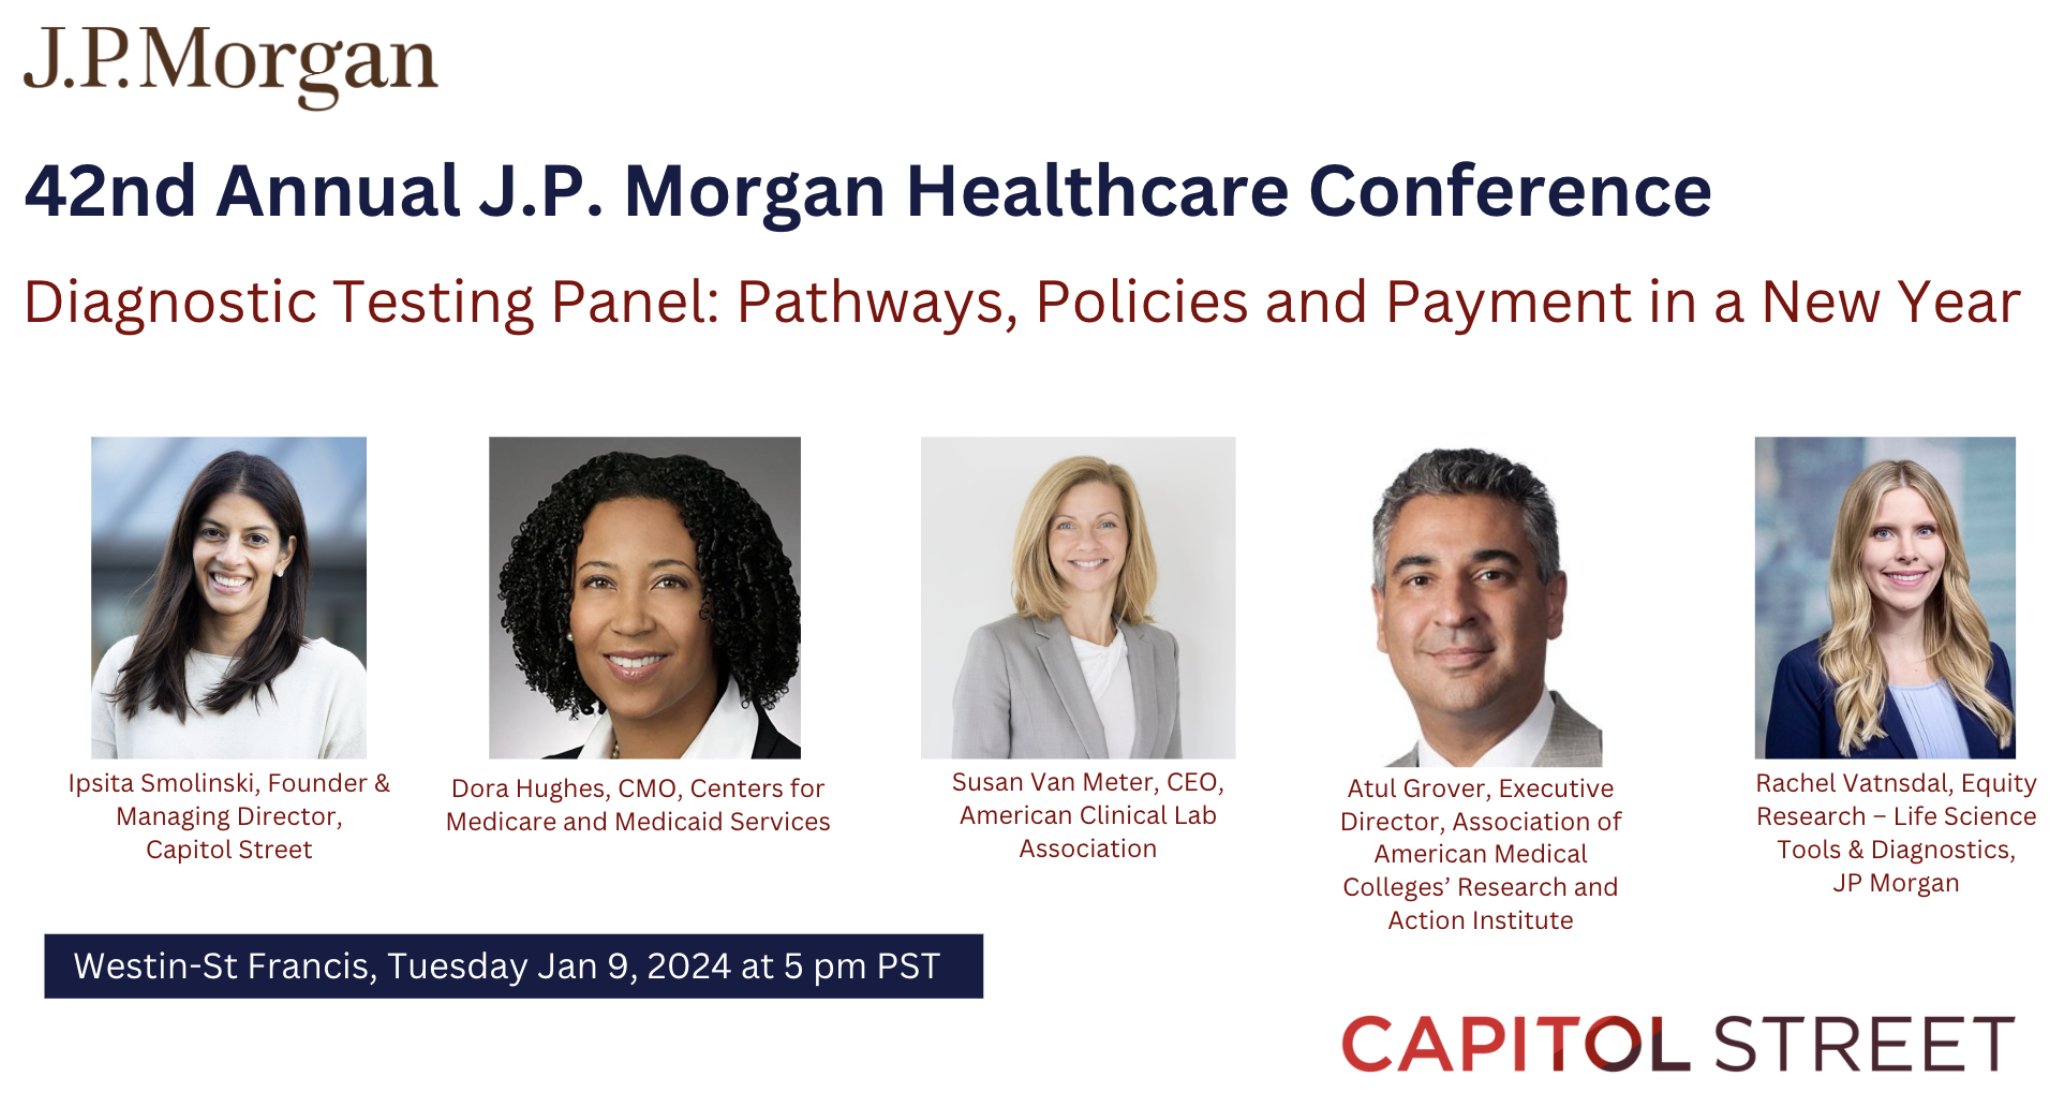 Atul Grover, MD, PhD, executive director of the AAMC Research and Action Institute, participated as an expert panelist at the 42nd annual JP Morgan Healthcare Conference. The panel is entitled, “Diagnostic Testing: Pathways, Policies and Payment in a New Year."